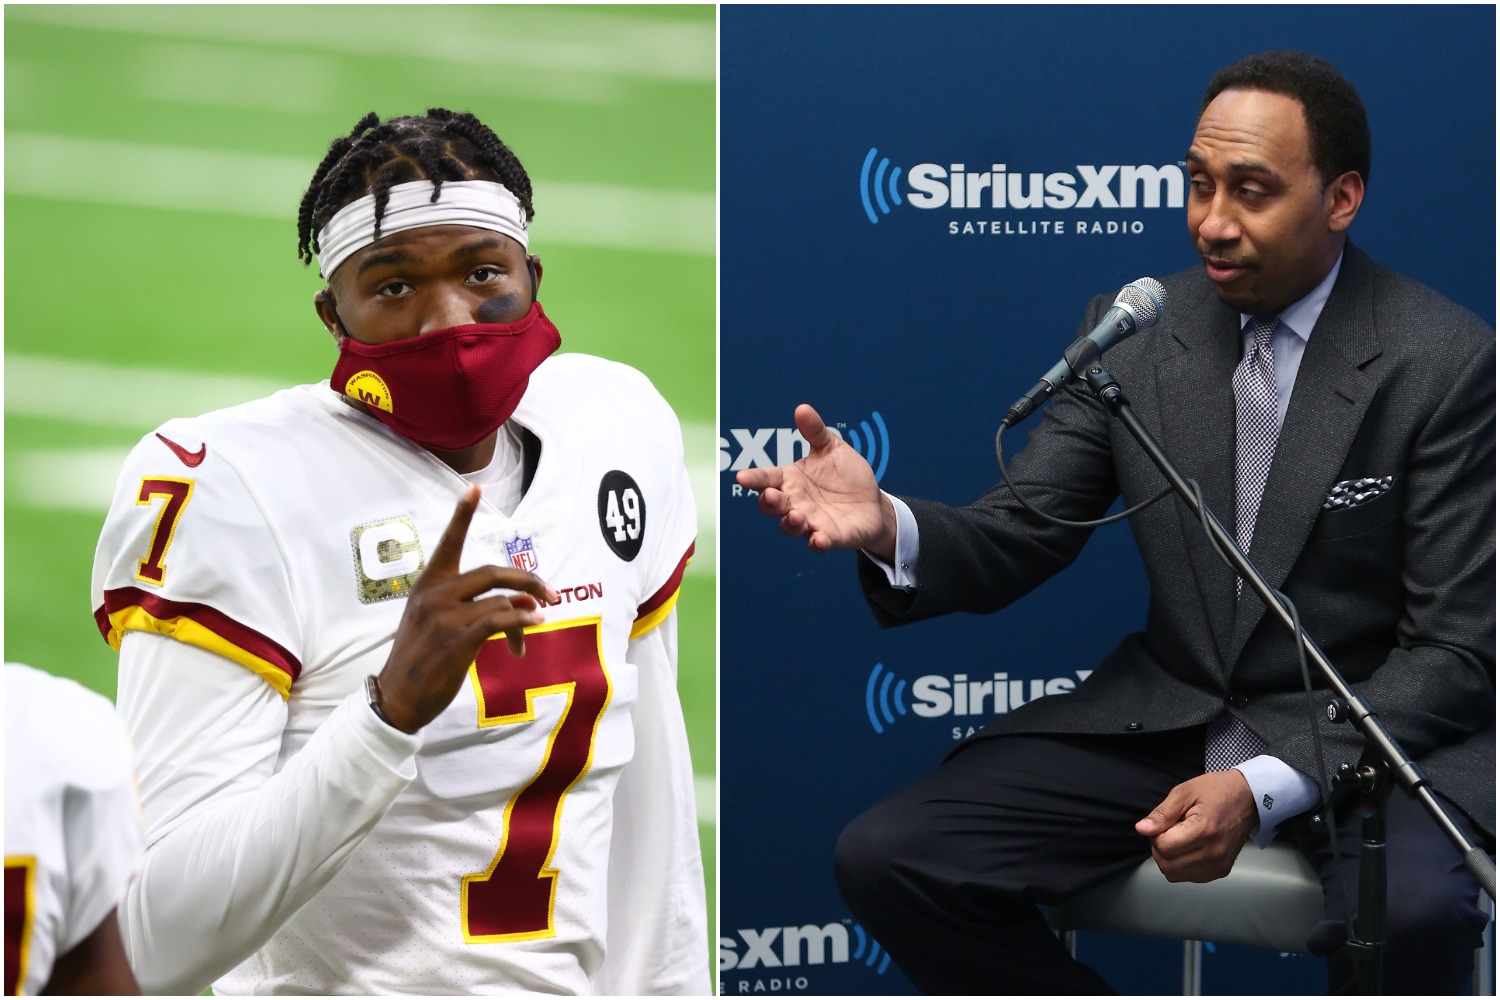 Even though he's on vacation, Stephen A. Smith took to Twitter on Monday afternoon to put former Washington QB Dwayne Haskins on blast.